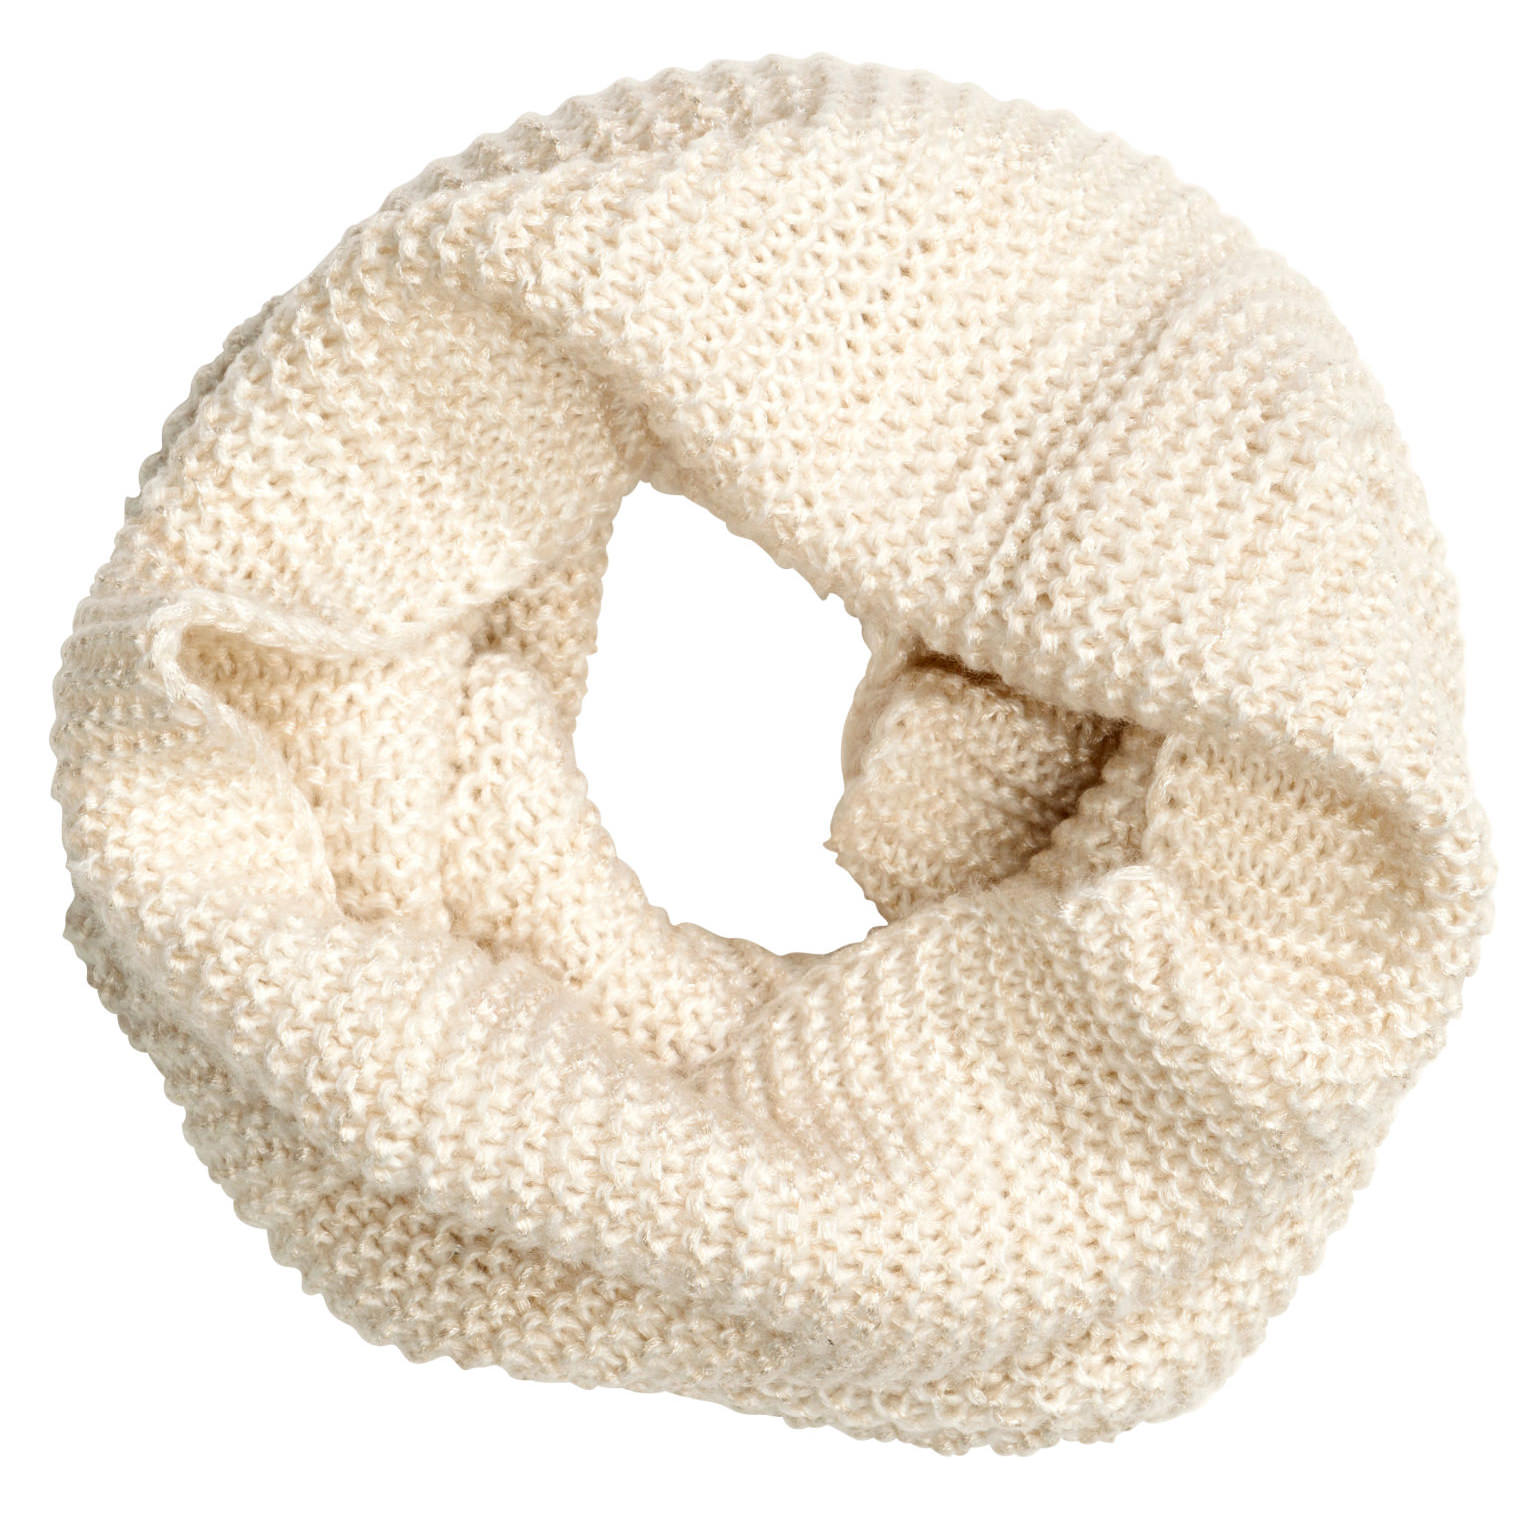 Knitted tube scarf £3.00 - H&M - Image: H&M